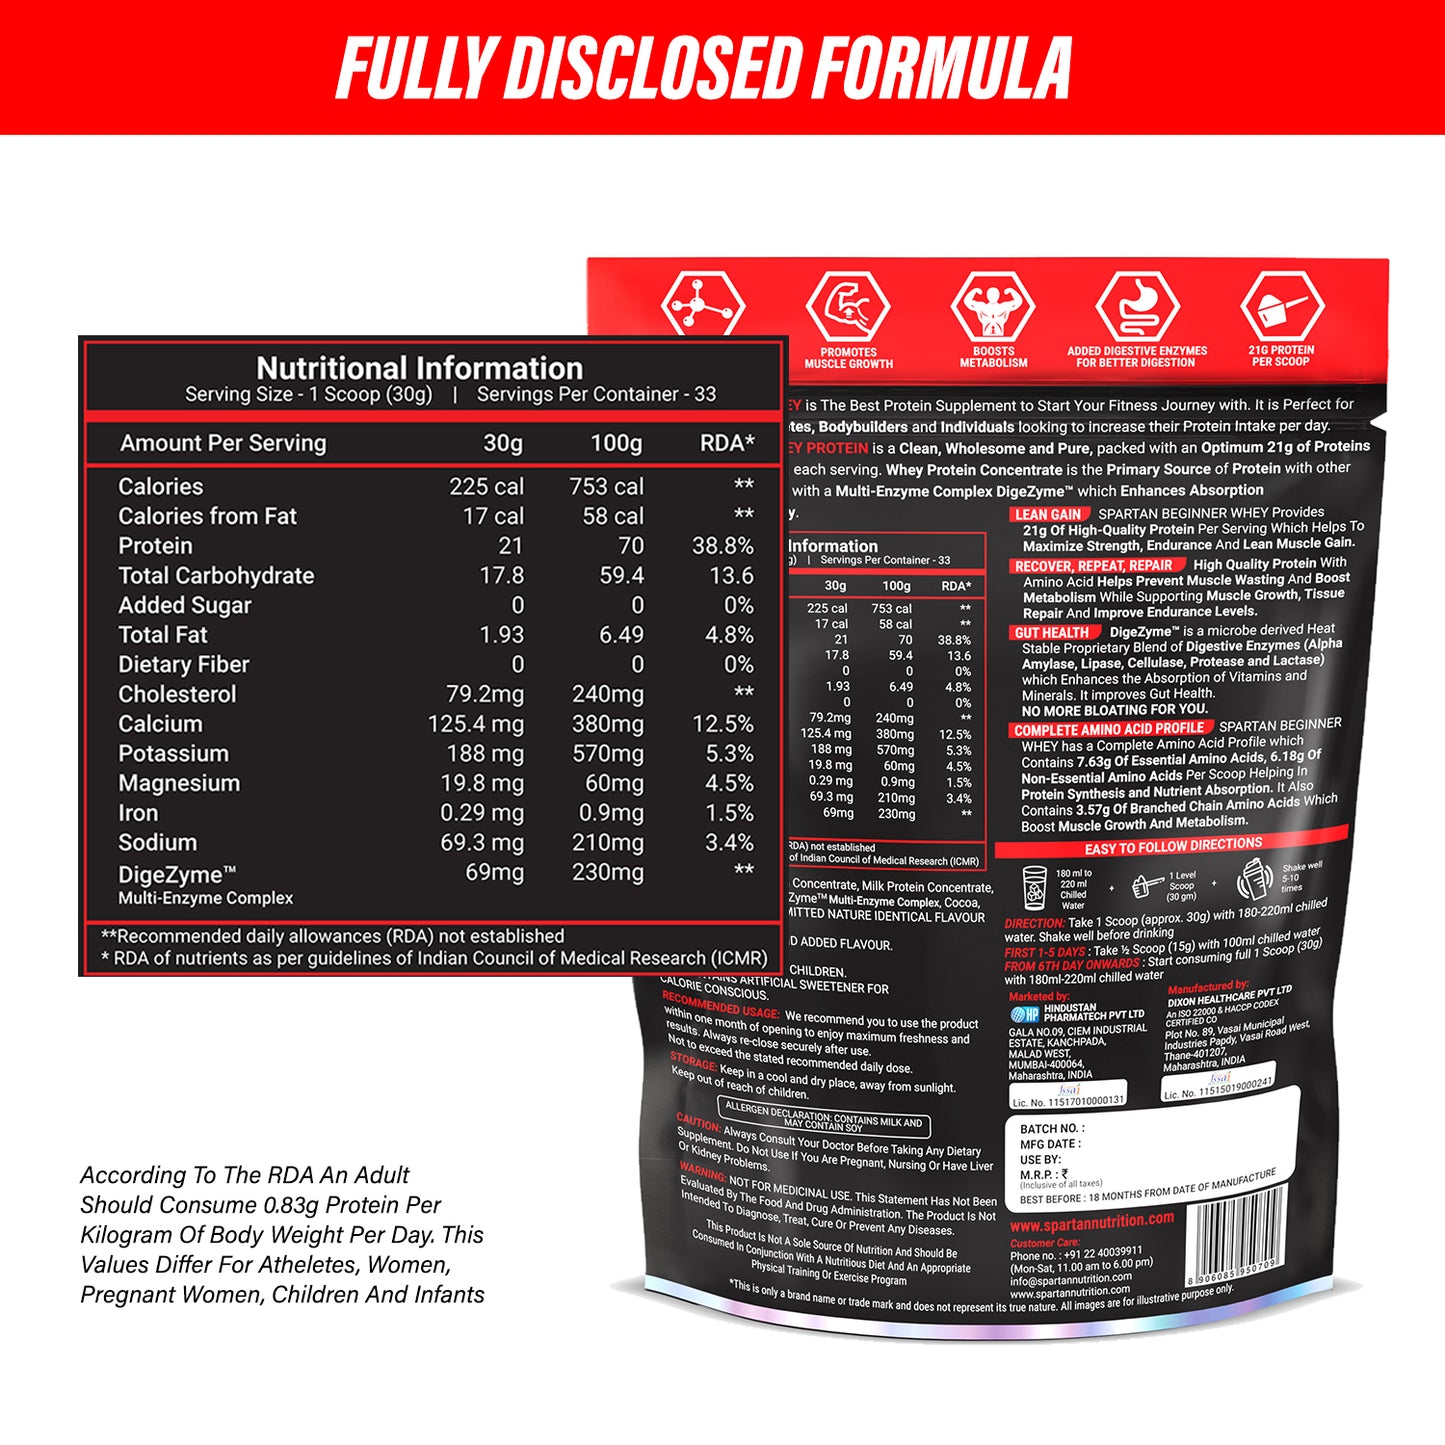 Spartan Nutrition Enhanced Beginner Whey Protein Supplement Powder Accelerates Muscle Building and Increases Body Strength - 33 Servings, 21g Protein. Chocolate Delight, 2.2 lbs